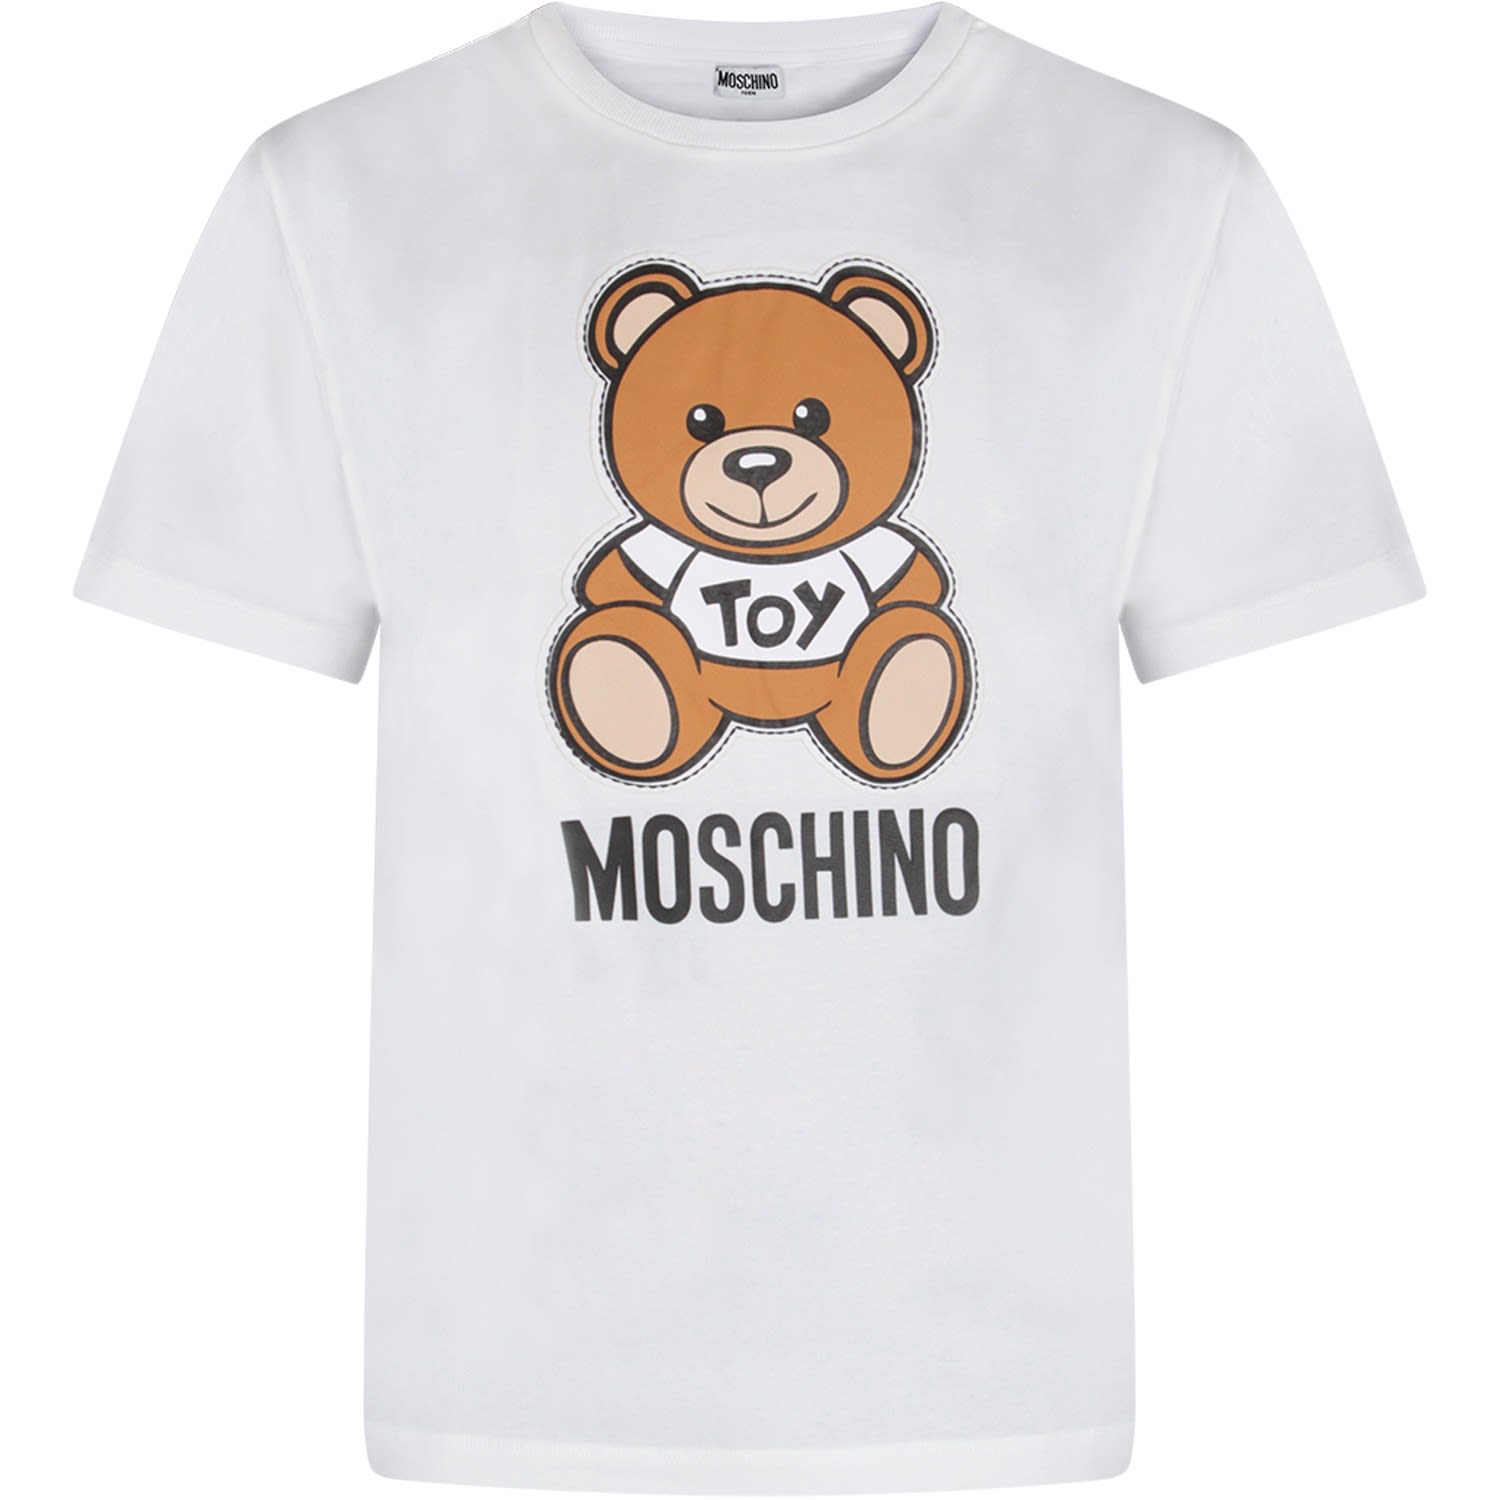 Moschino White Kids T-shirt With Colorful Teddy Bear | ModeSens